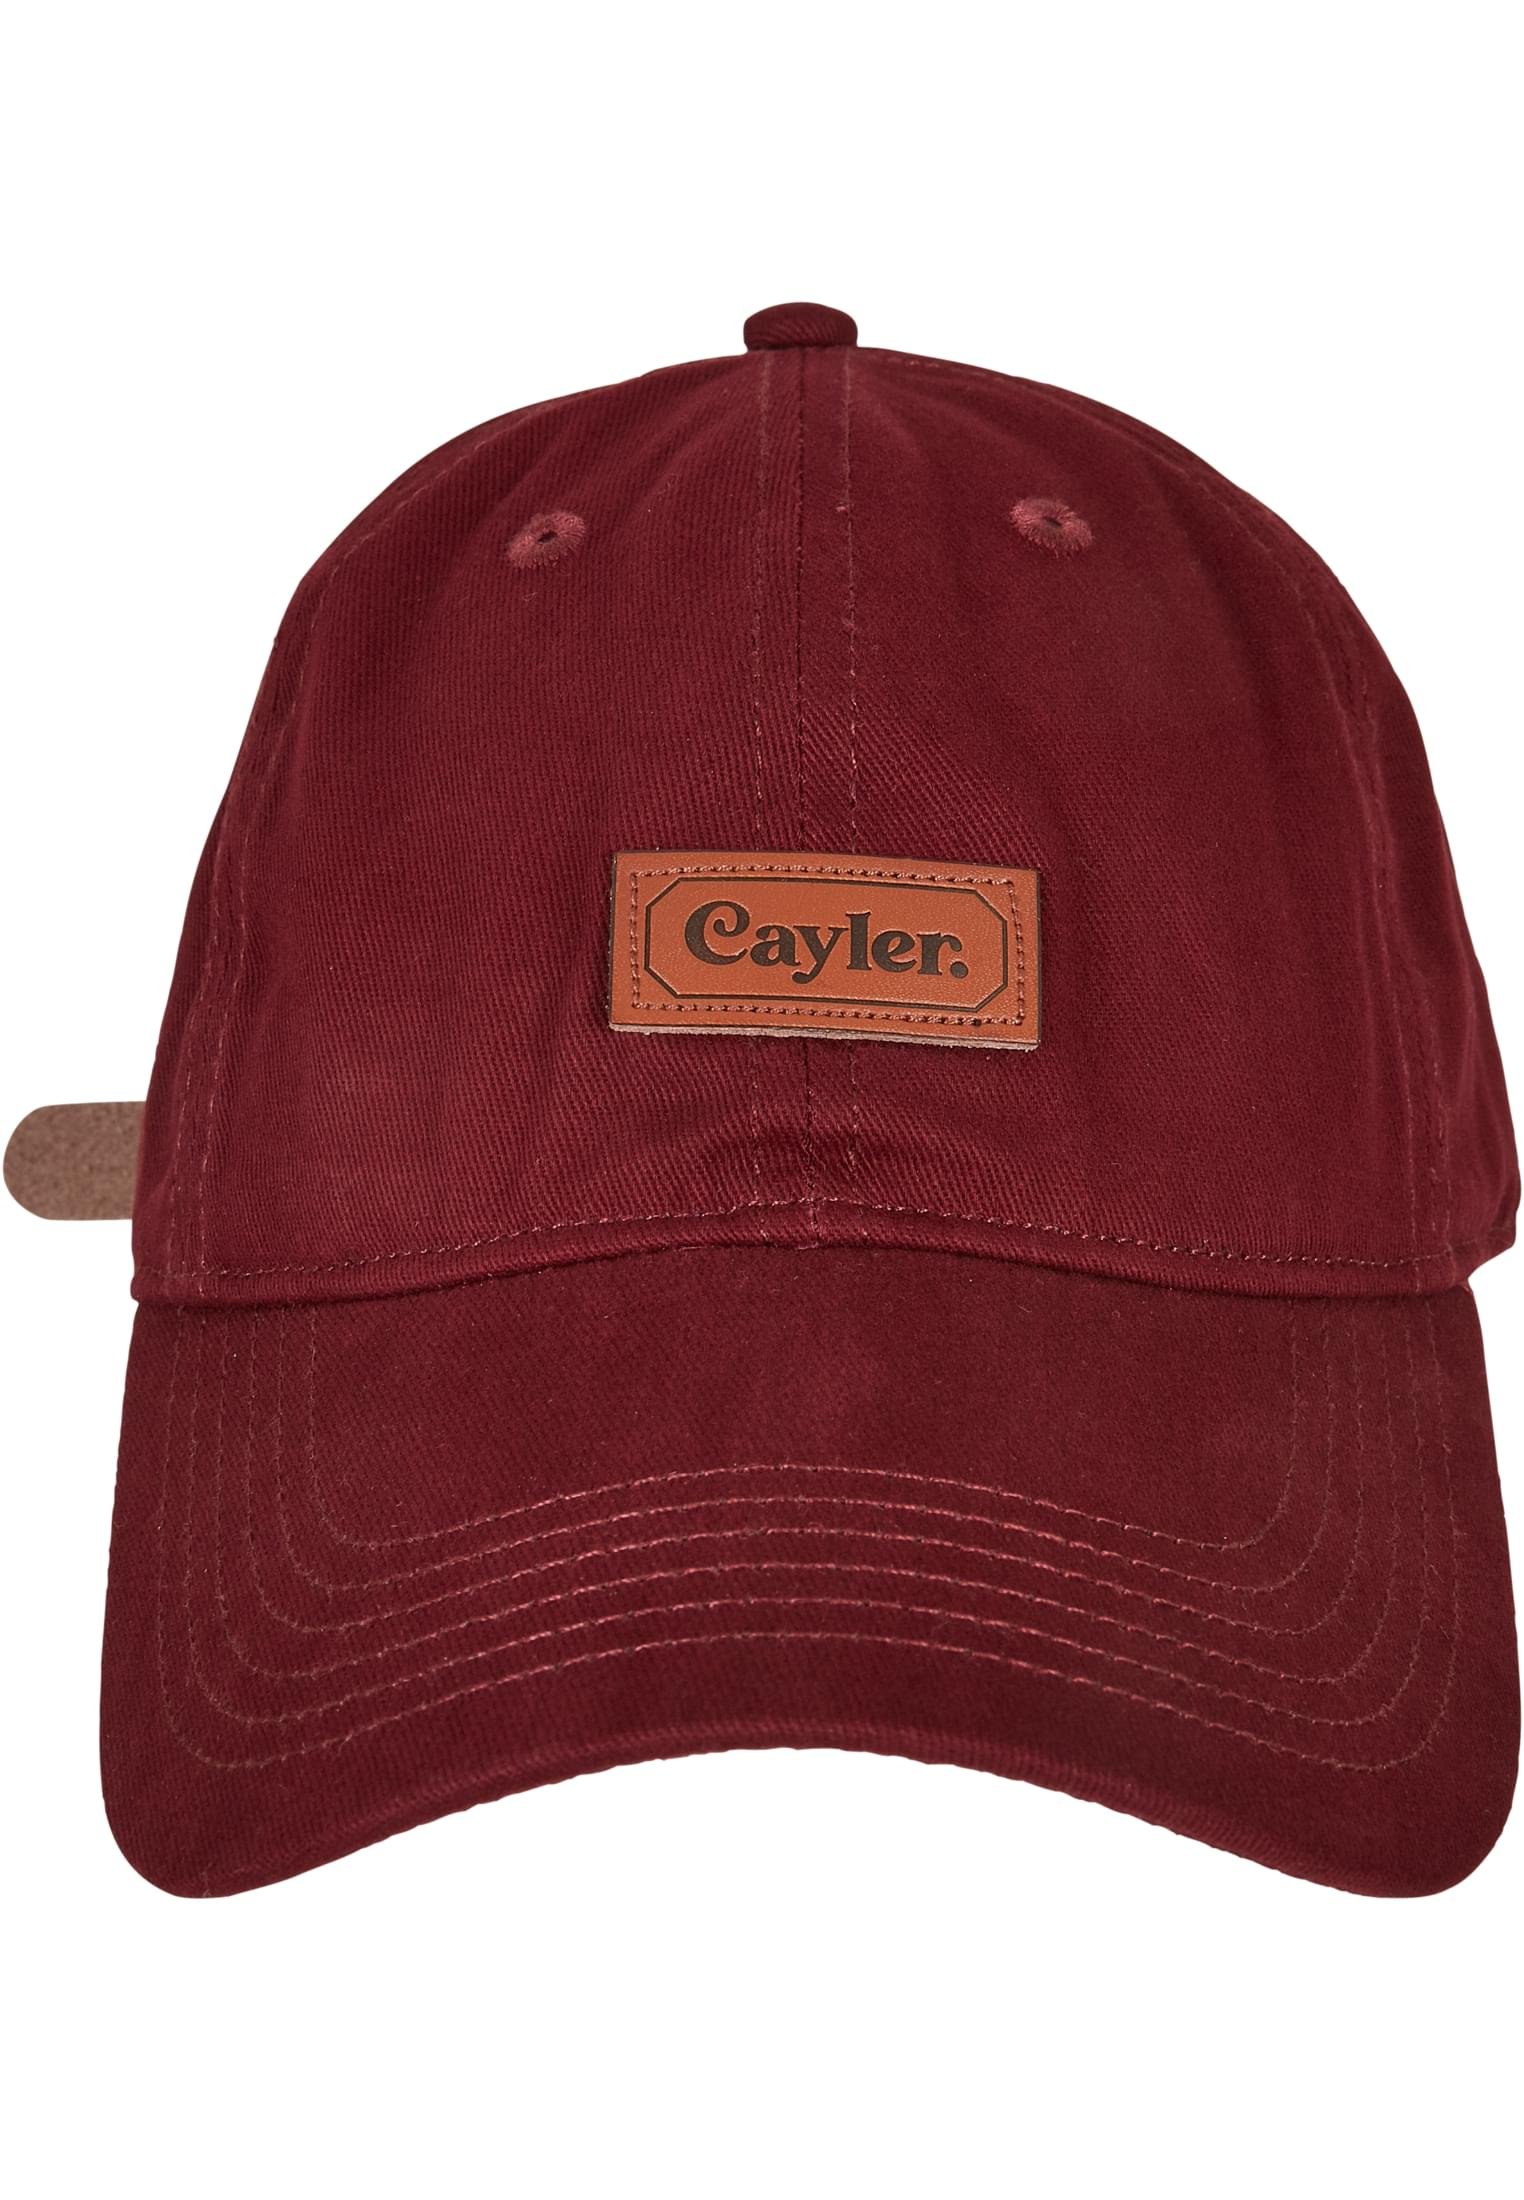 Classy Patch Curved Cap bordeaux one size